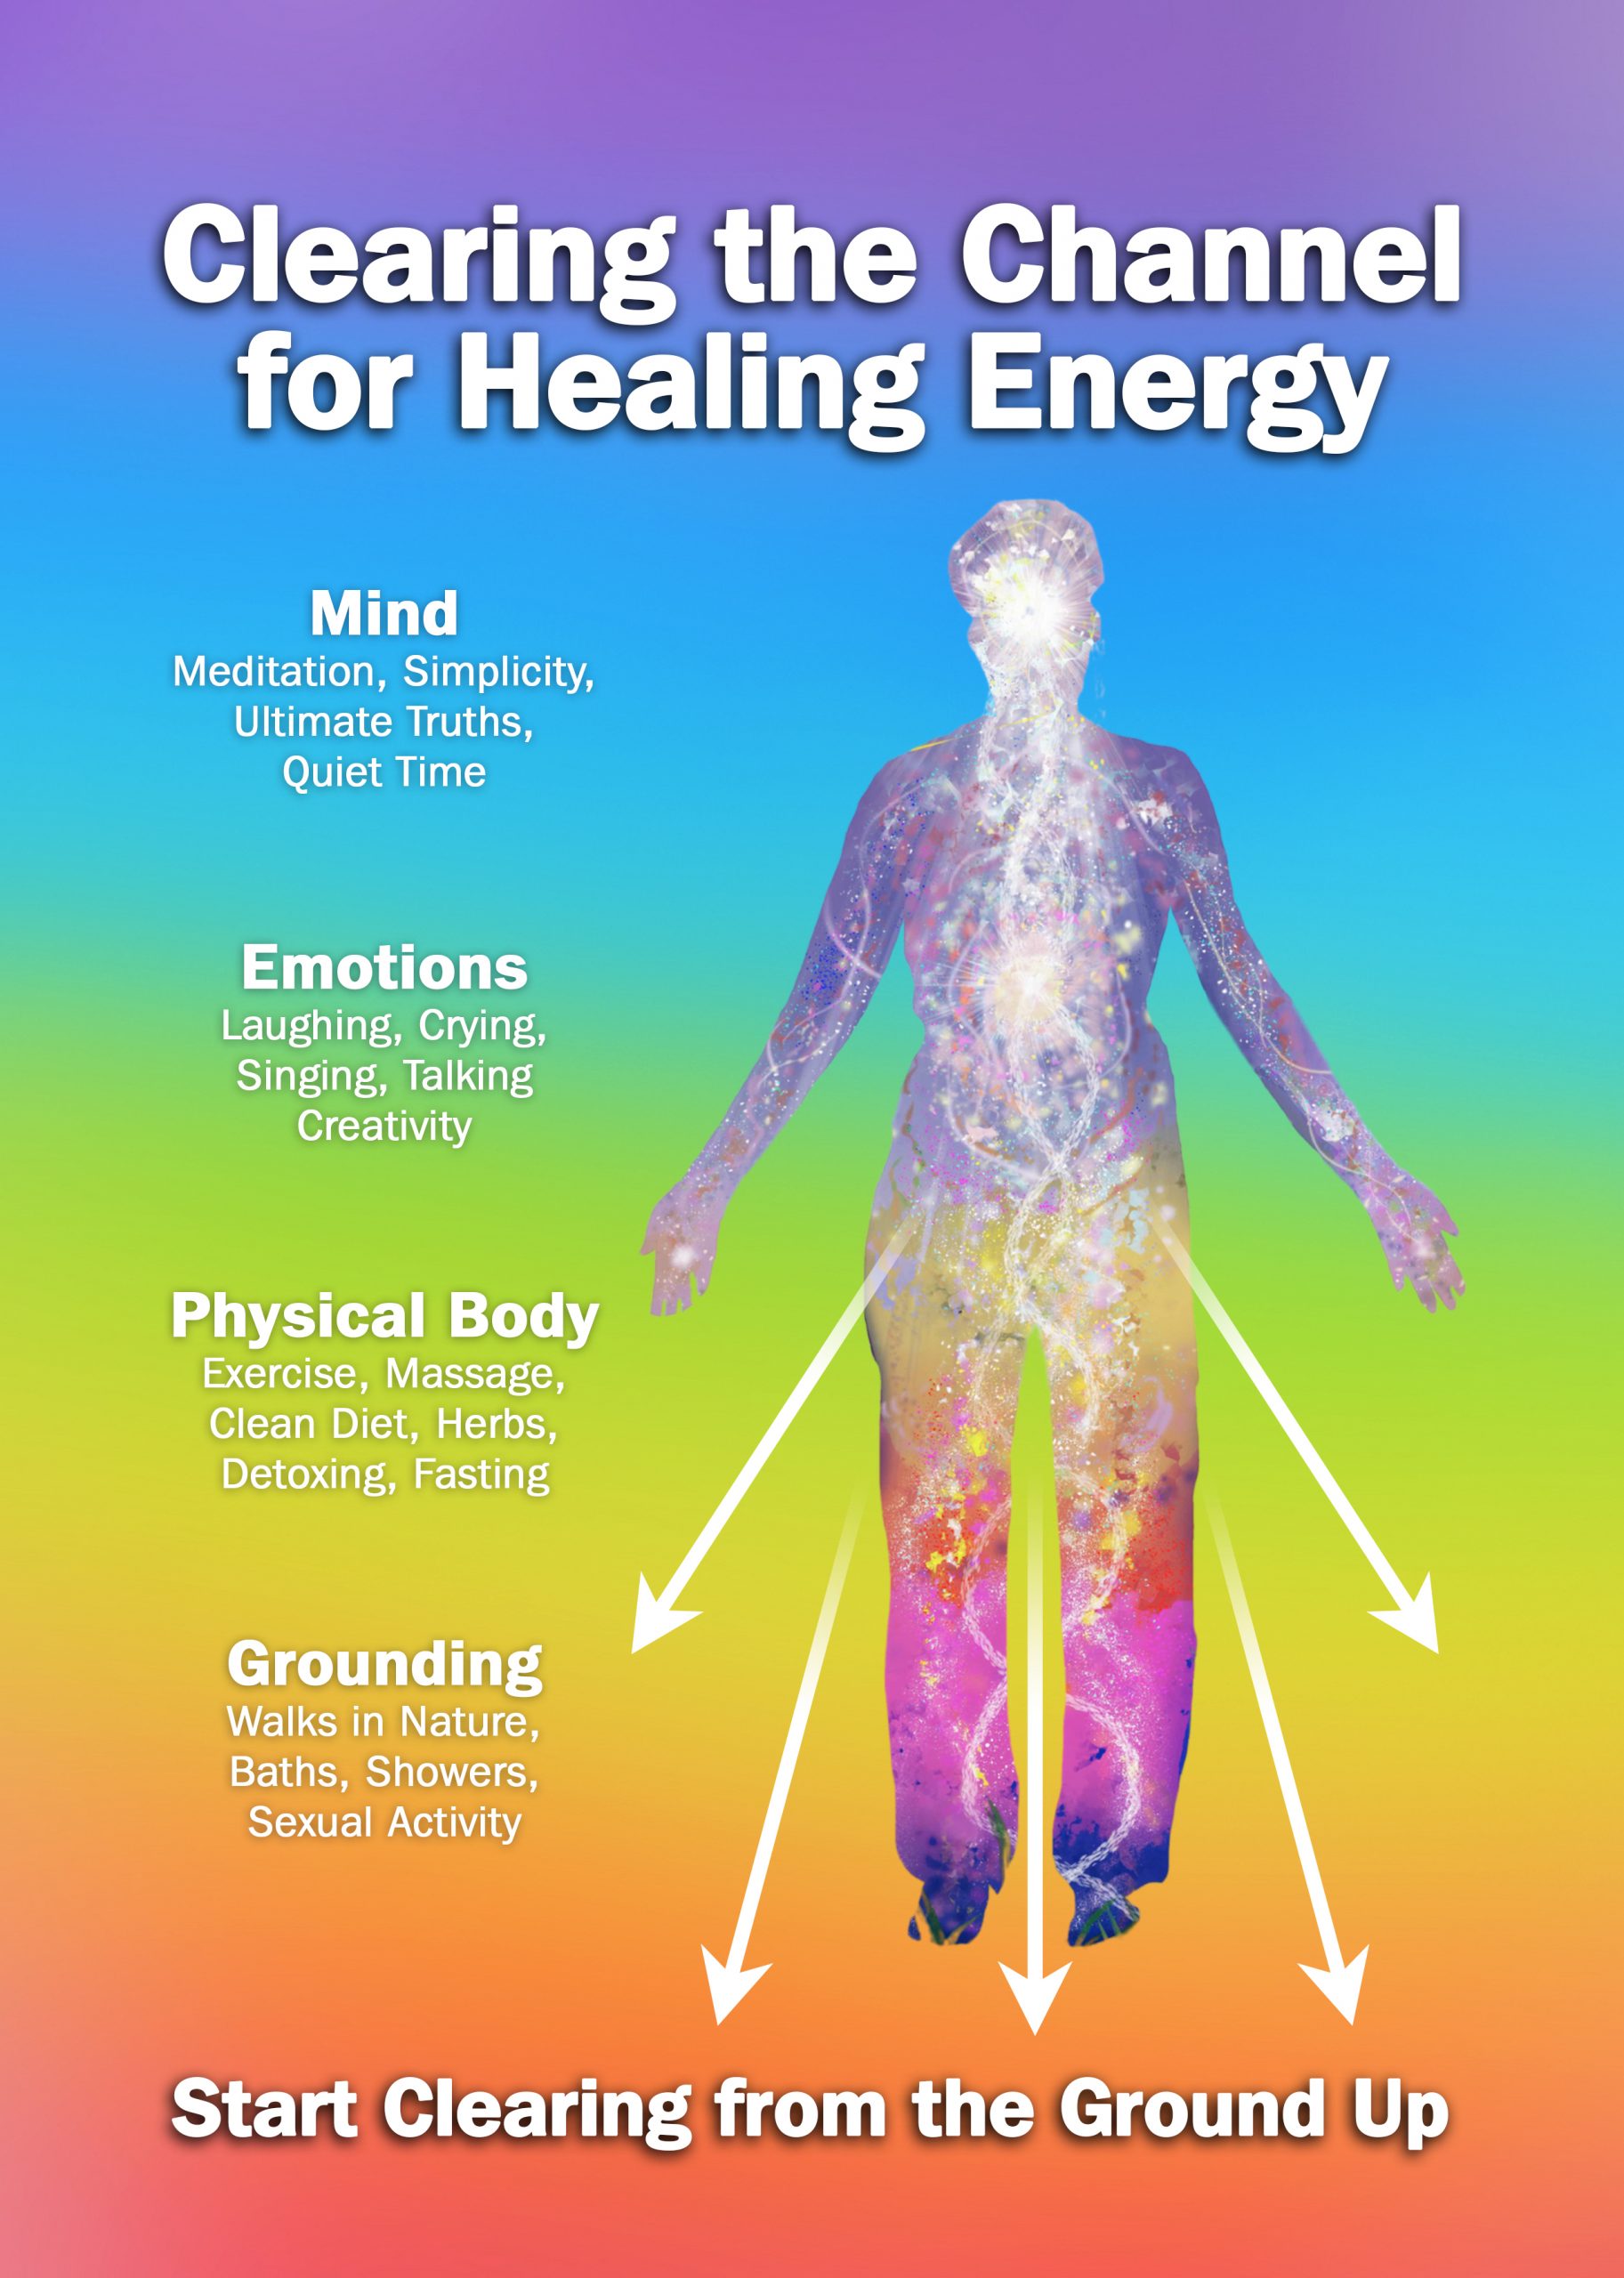 clearing the channel for healing energy infographic